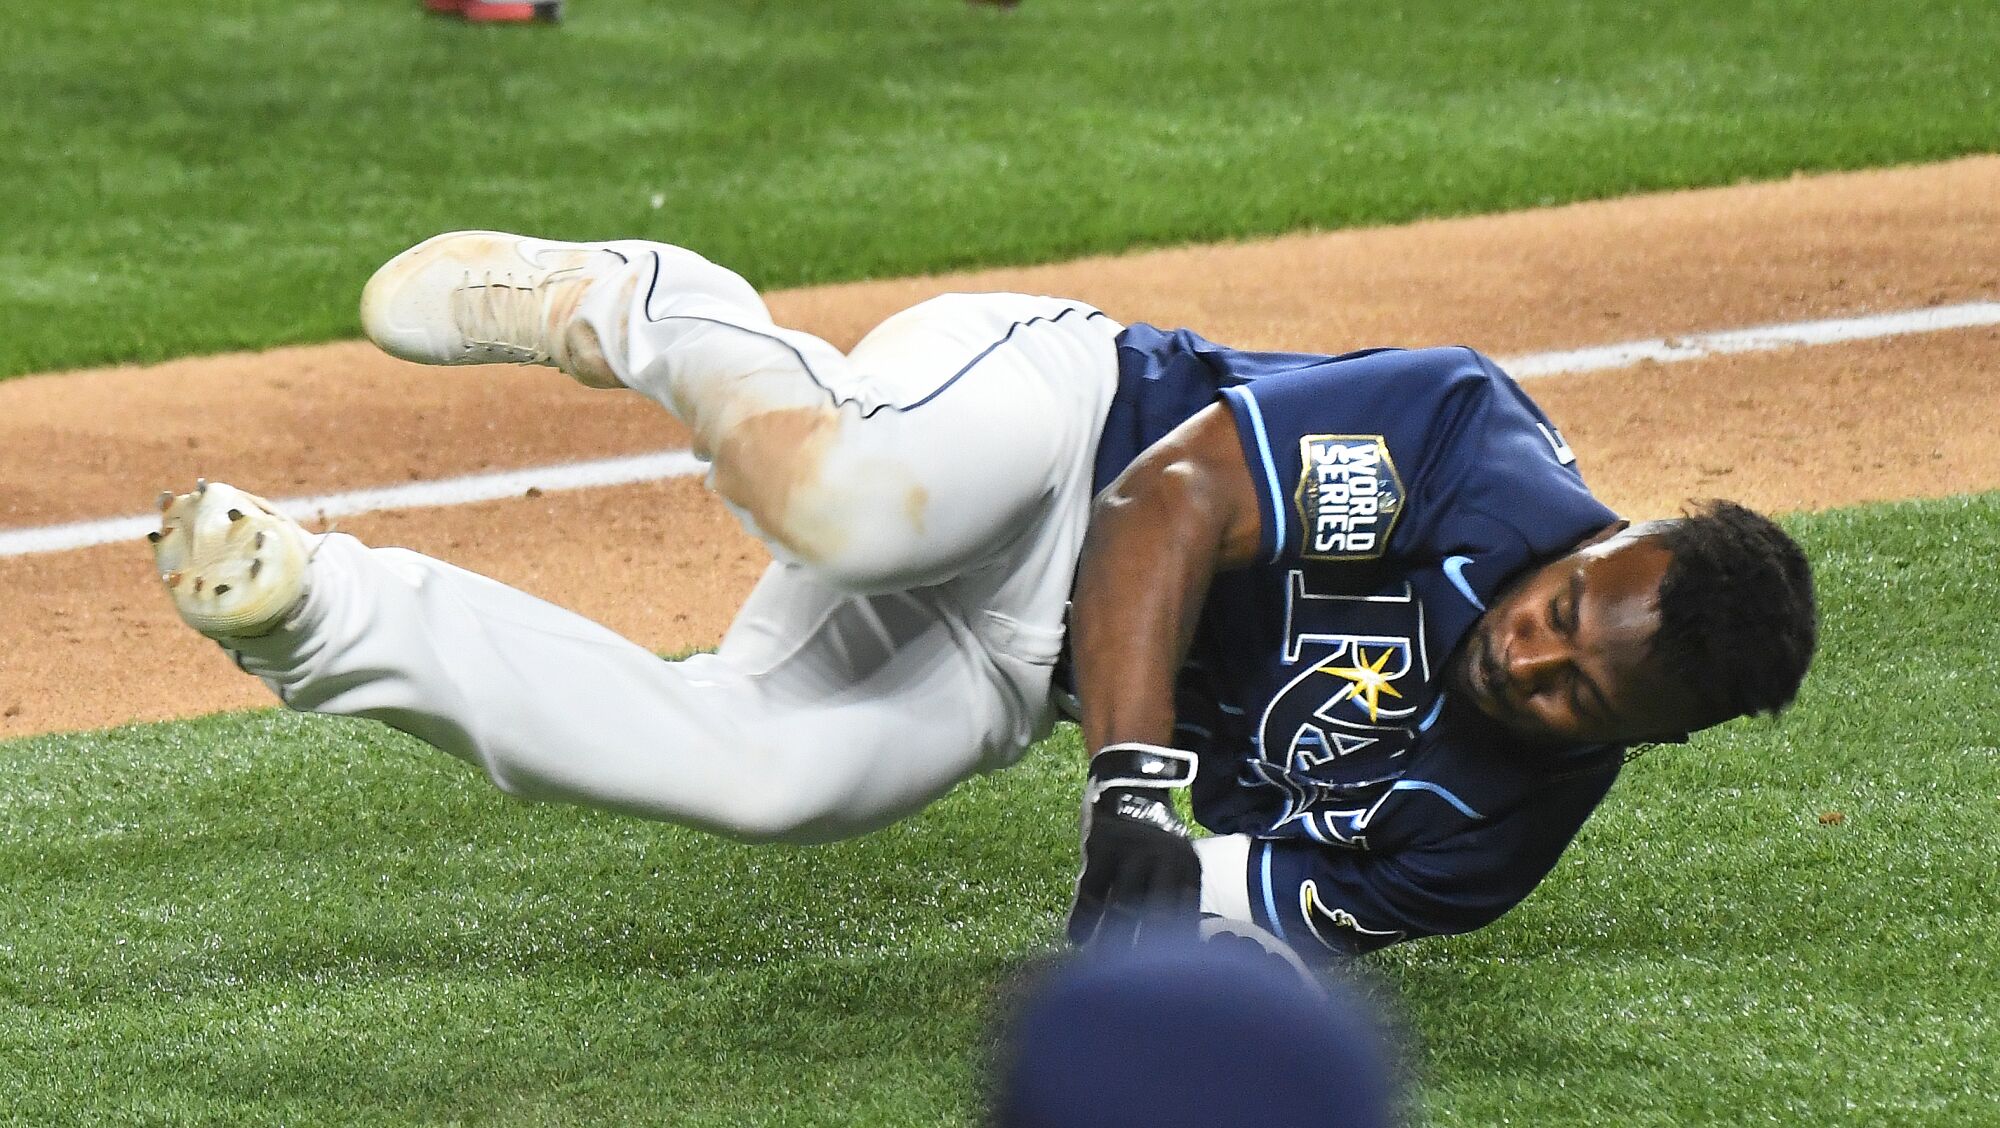 Tampa Bay Rays baserunner Randy Arozarena stumbles and falls between third and home before getting up.